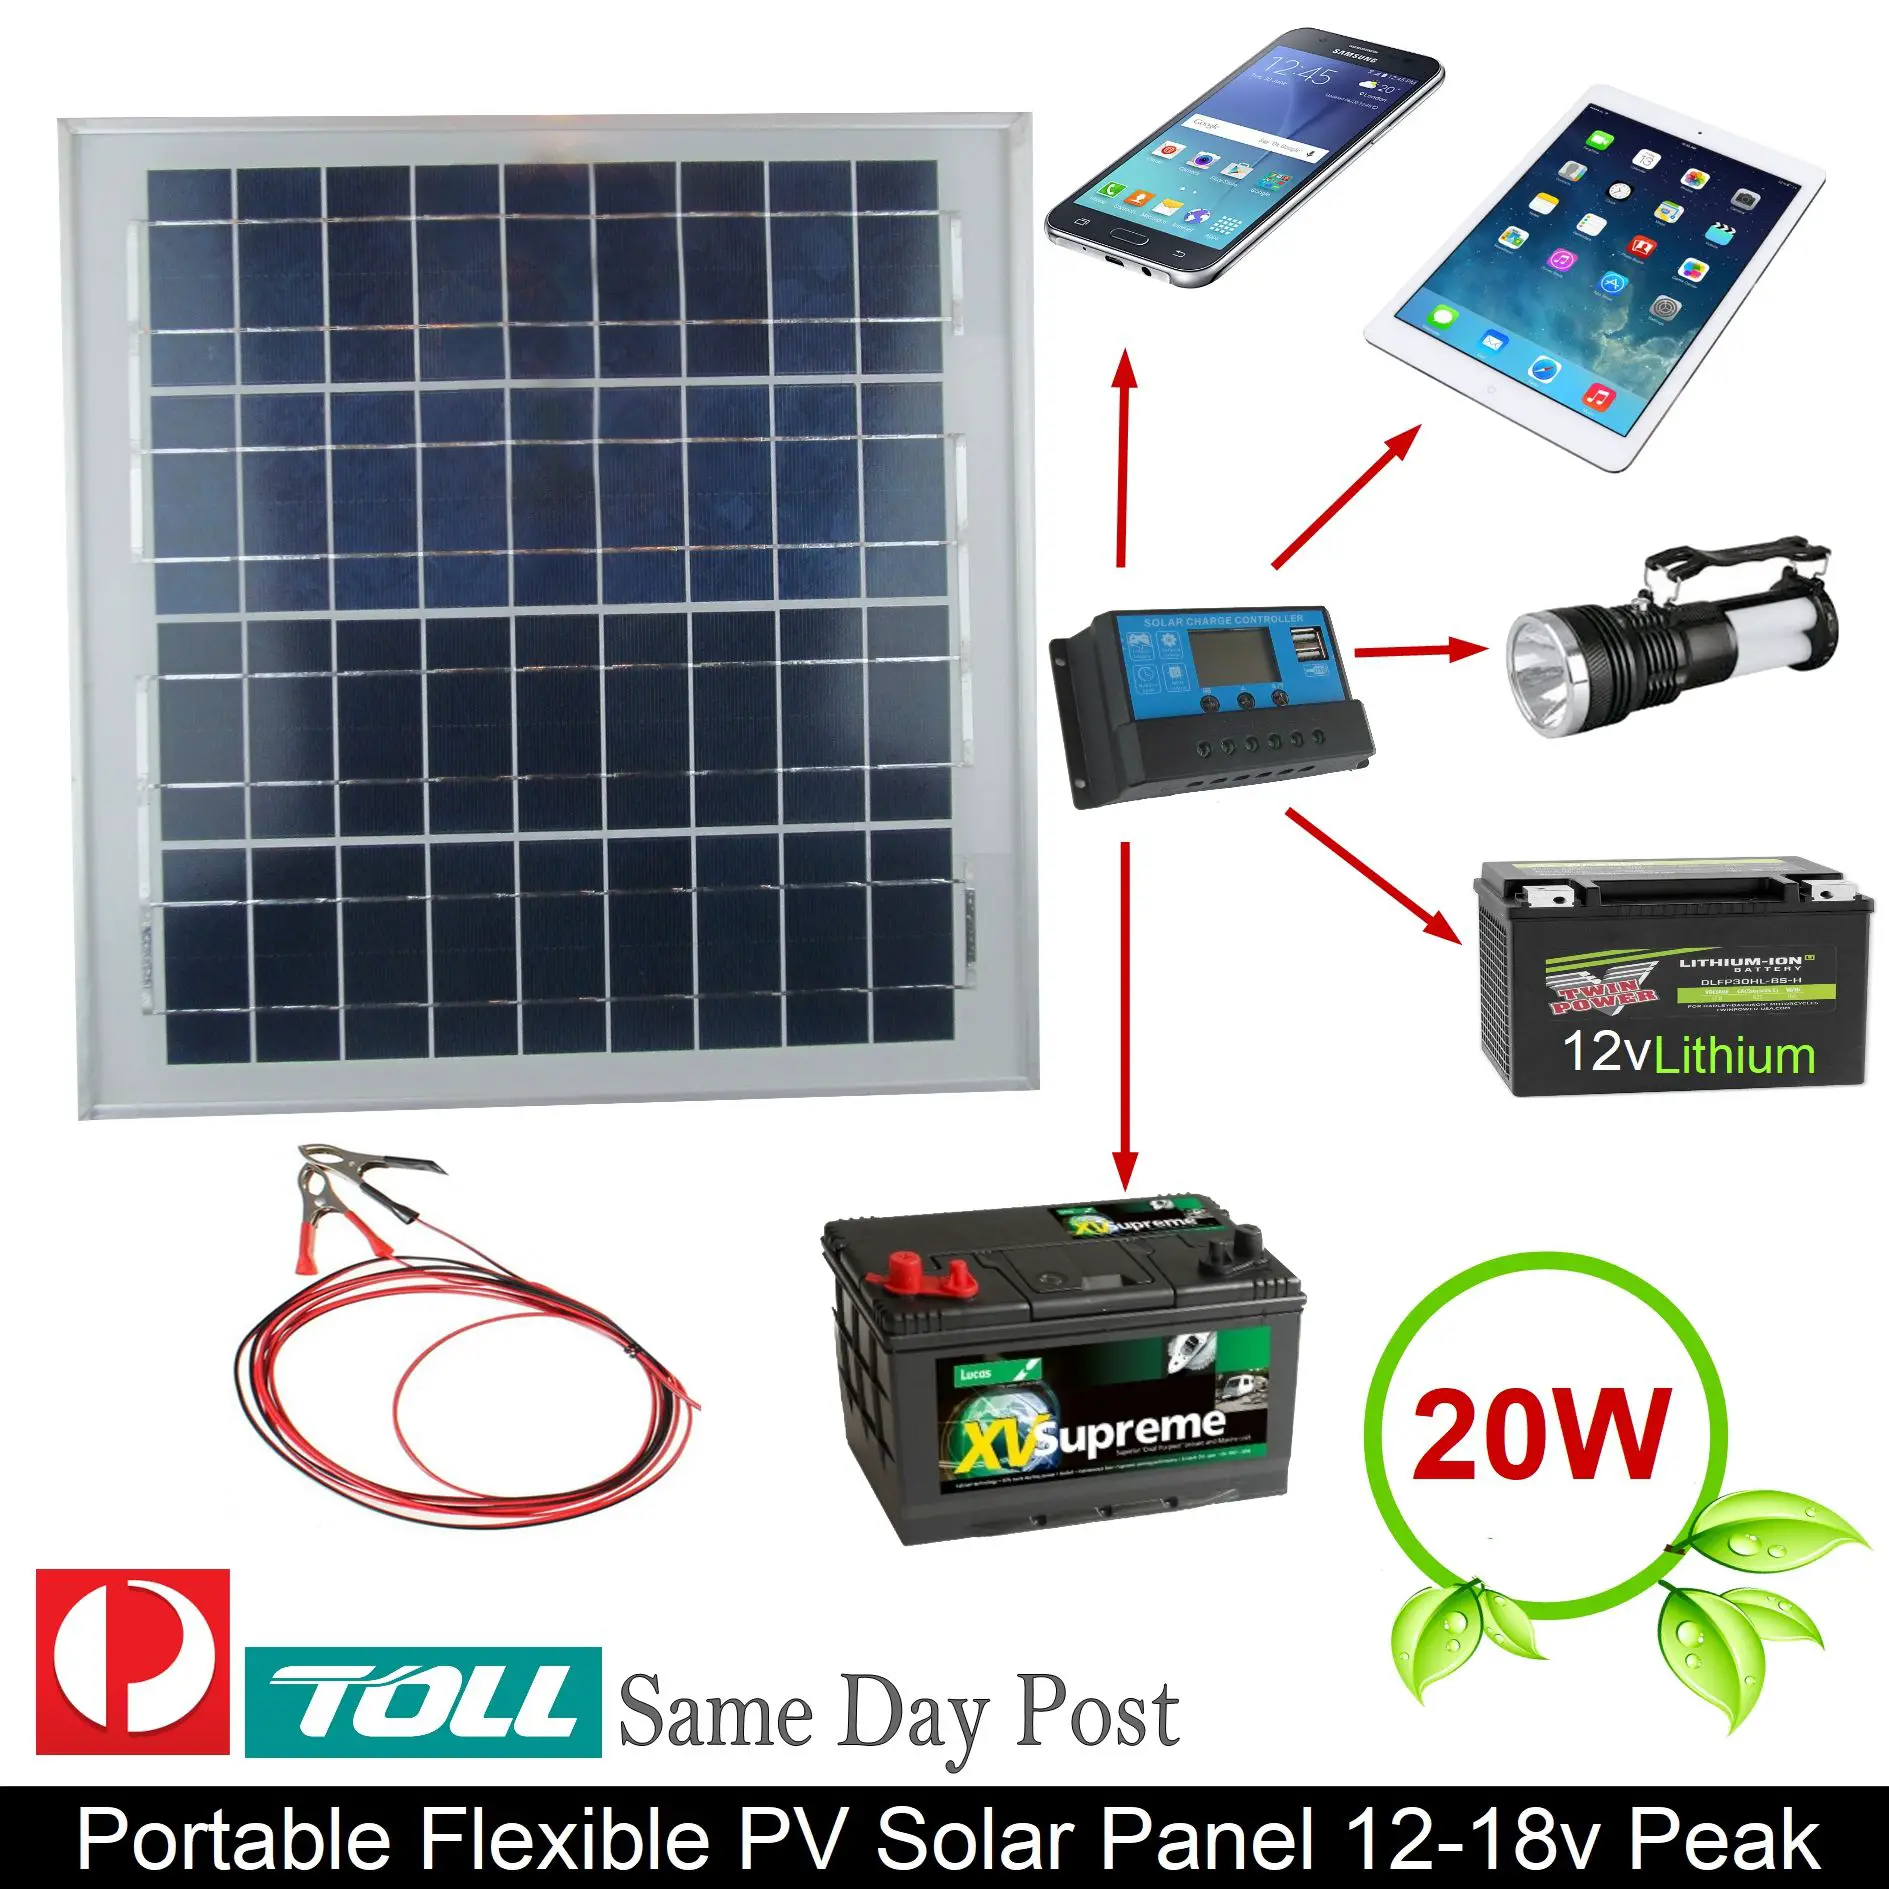 20W 12v SOLAR PANEL CHARGE BATTERY TRICKLE CHARGER KIT + SOLAR ...